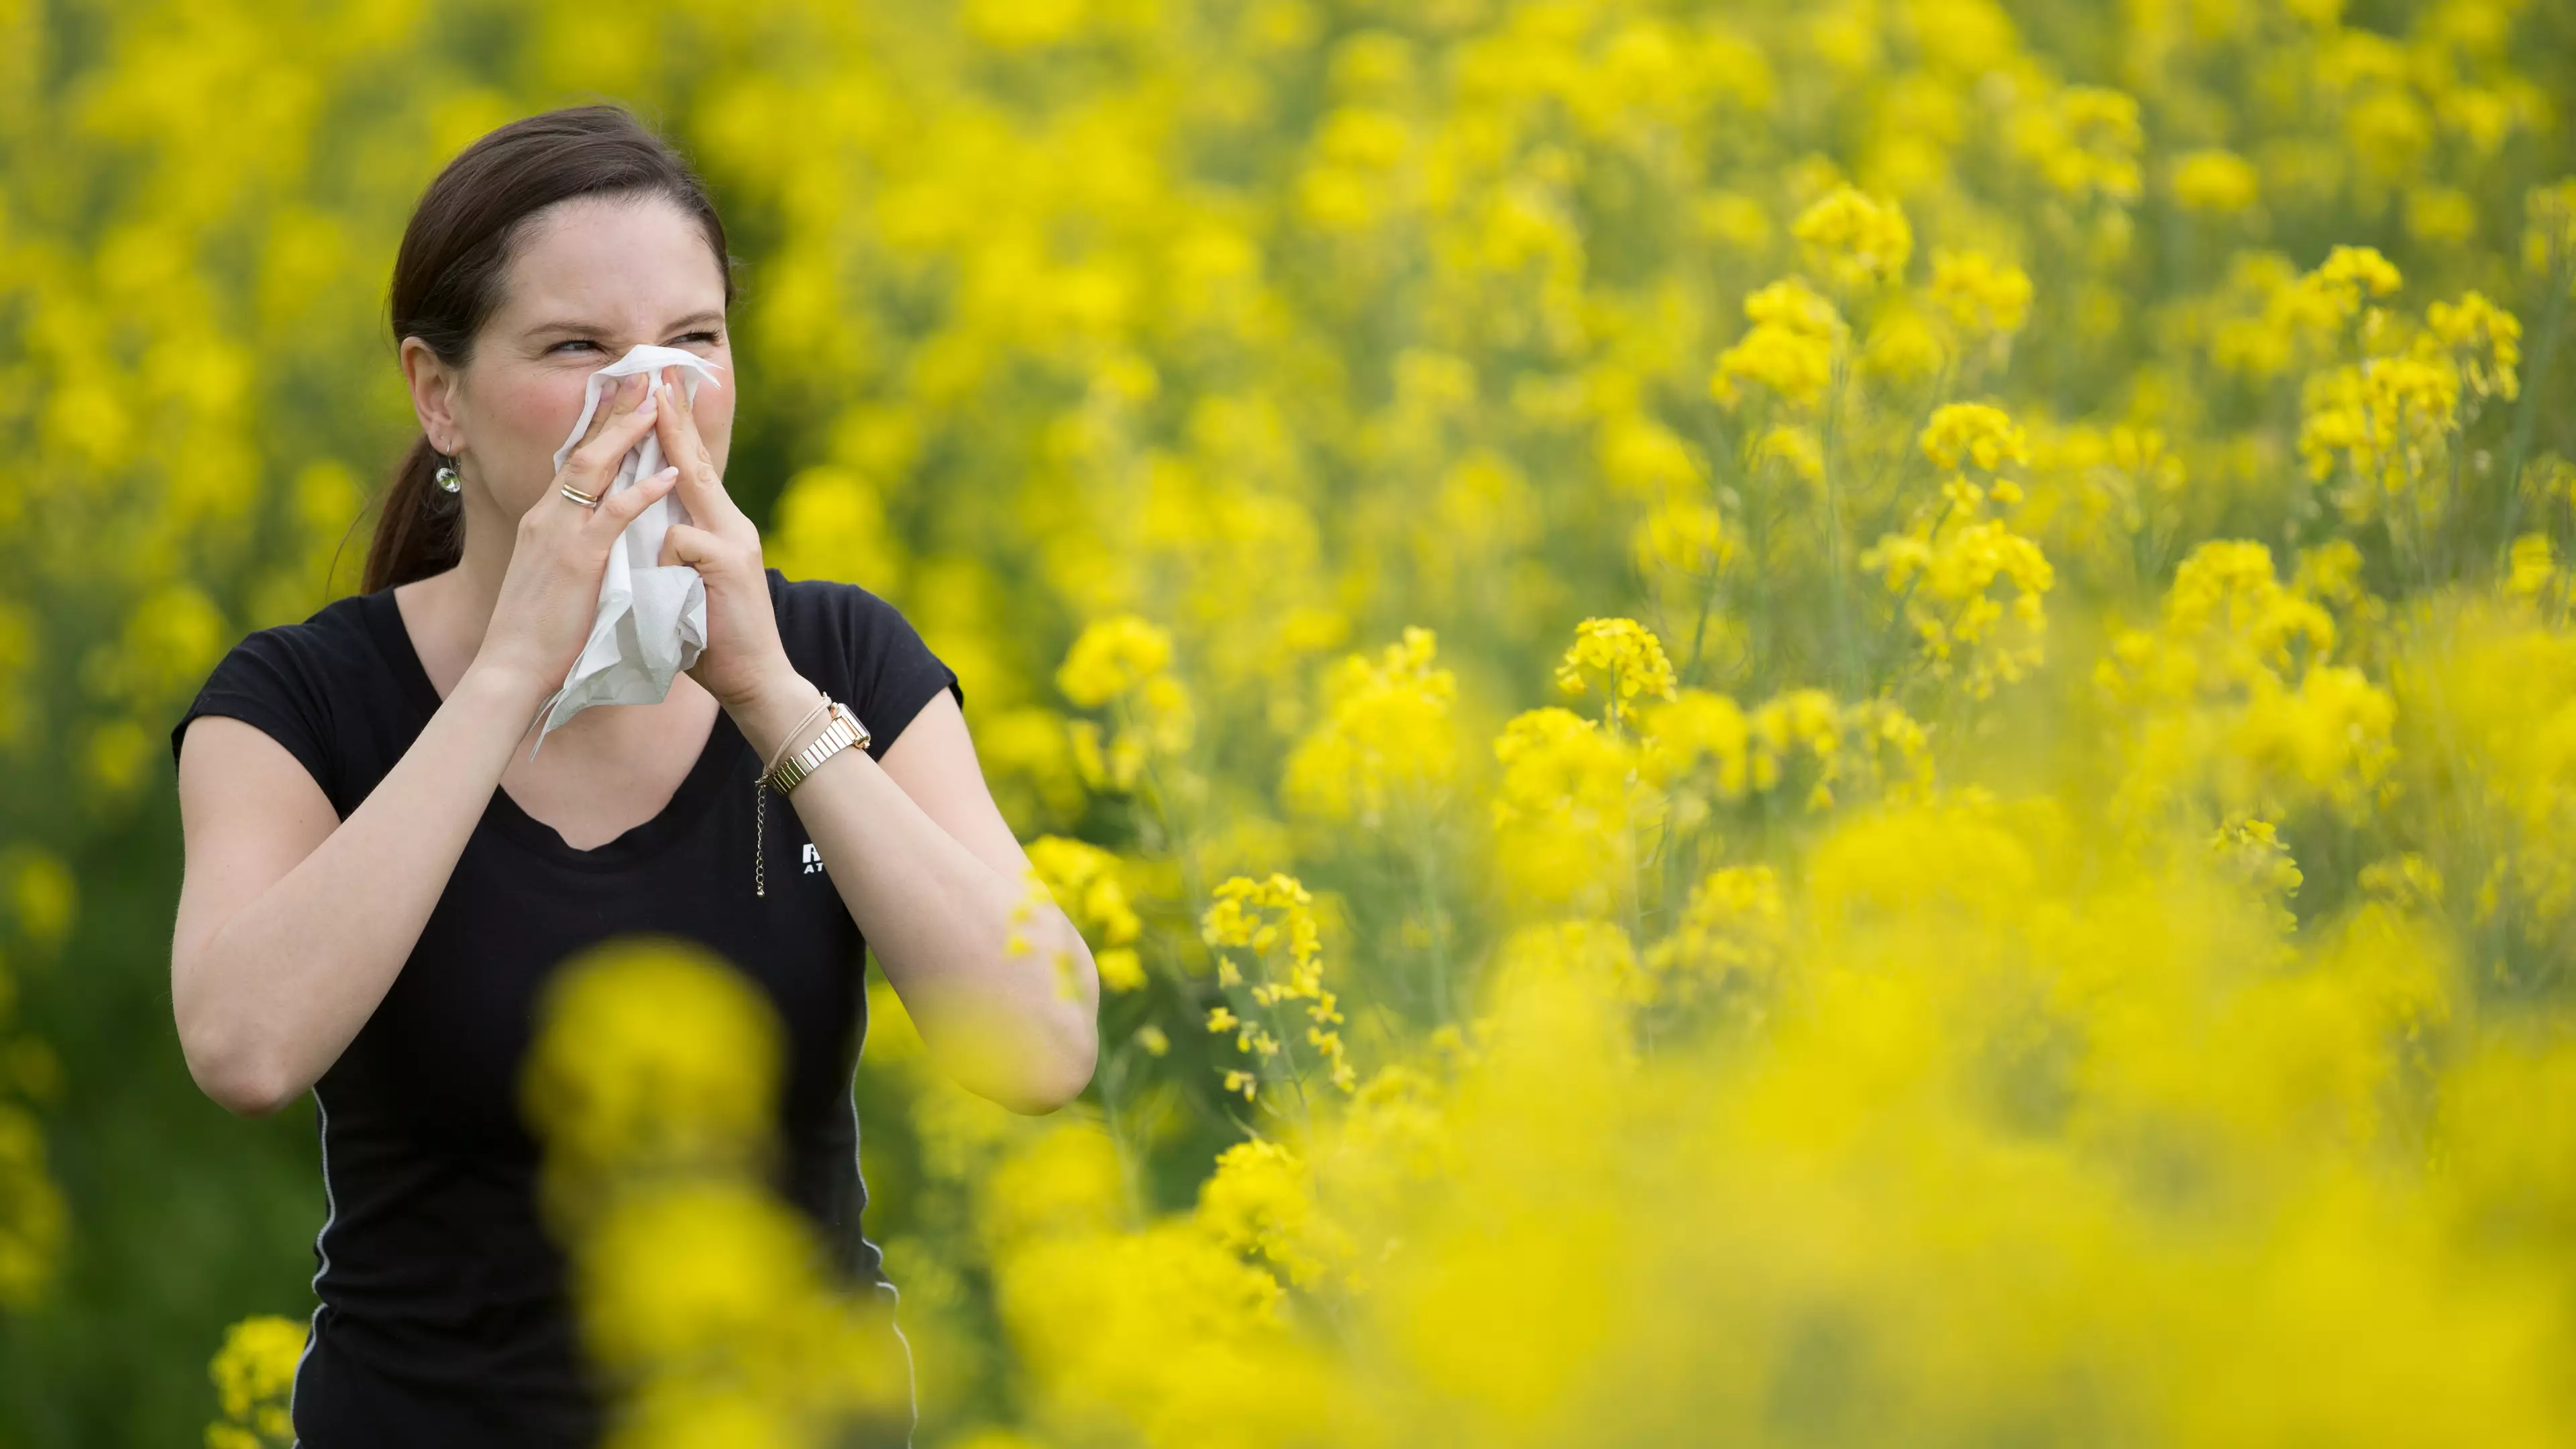 Hay Fever Warning As High Pollen Count Forecast For Large Areas Of UK